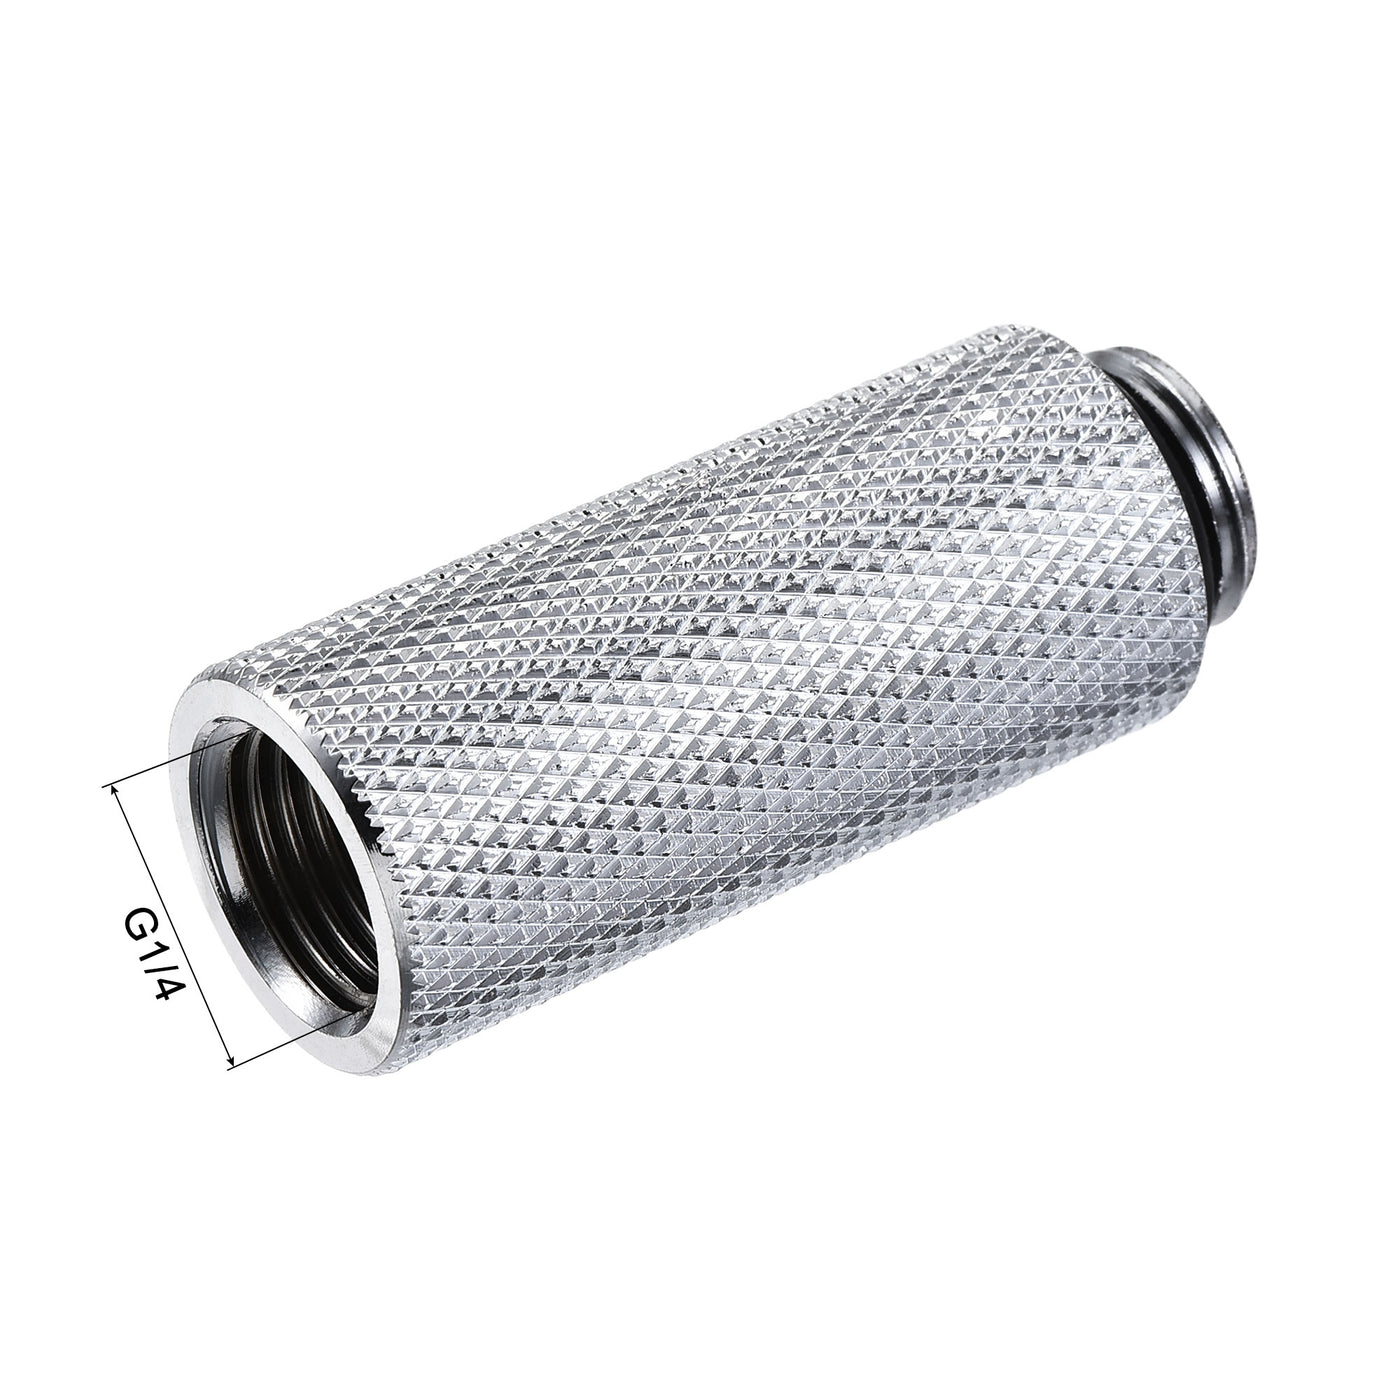 uxcell Uxcell Male to Female Extender Fitting G1/4 x 40mm for Water Cooling System Silver